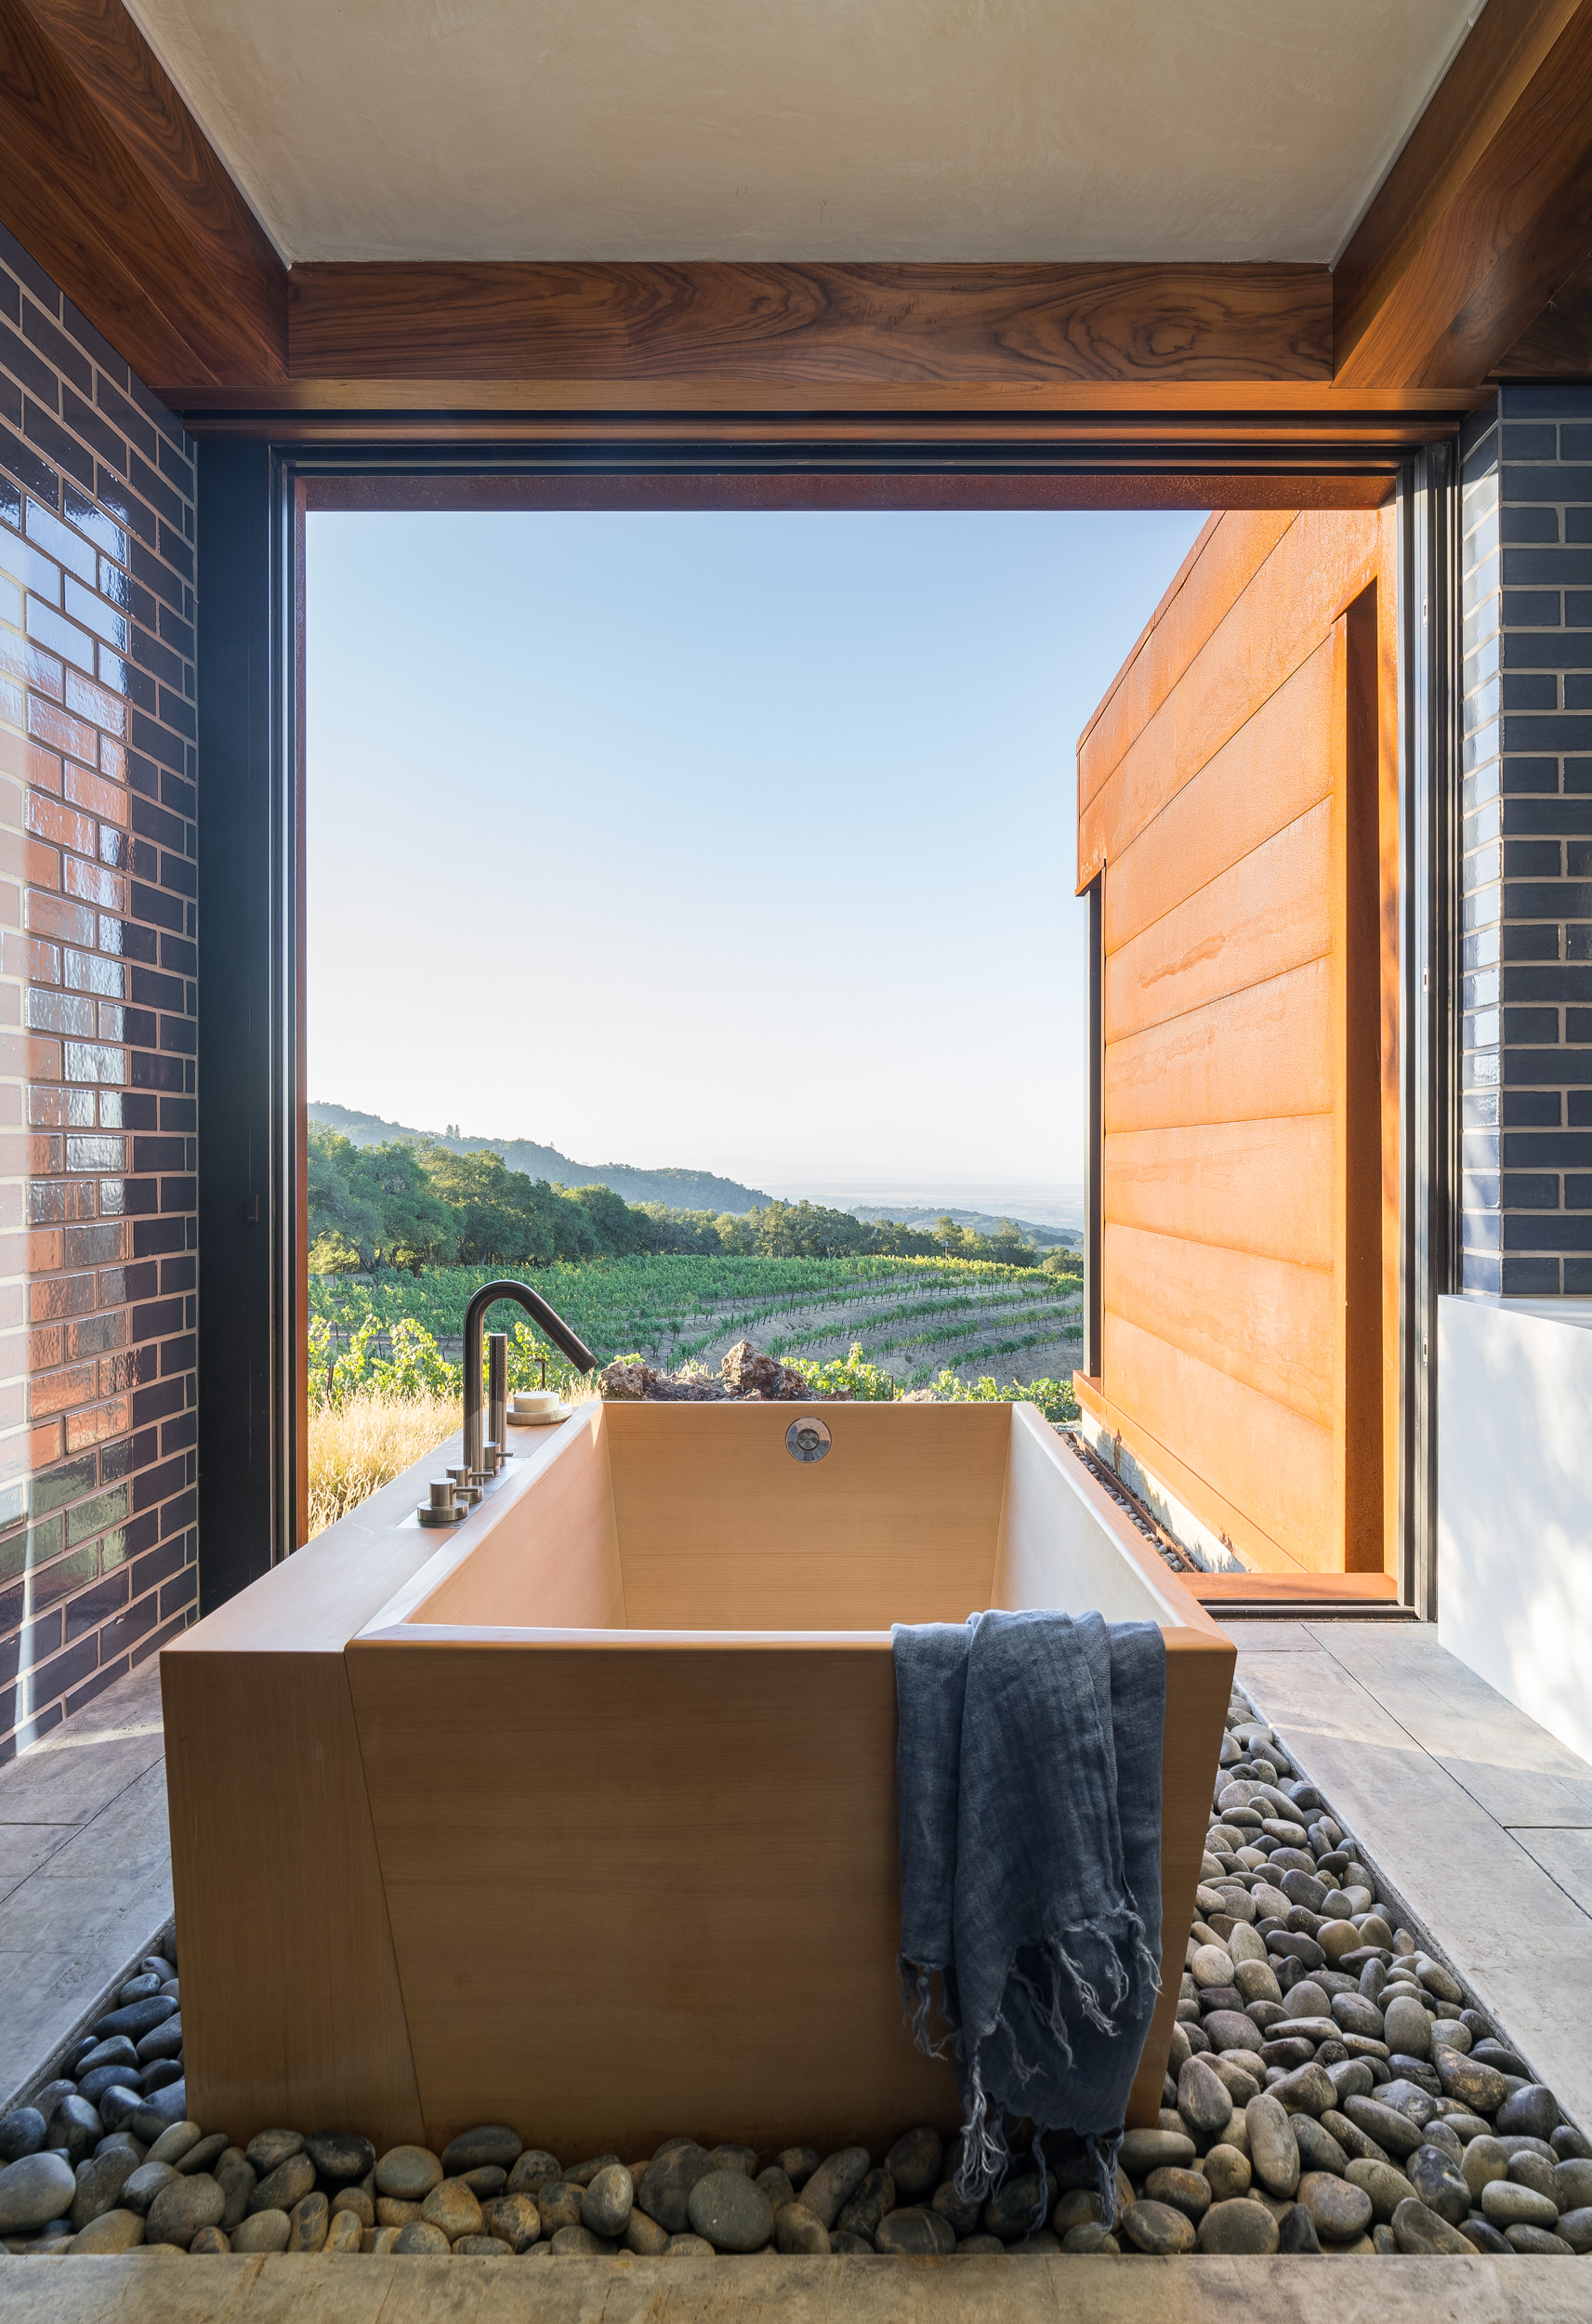 A deep soaking tub on a bed of smooth river stones brings a sense of calm to the primary bath.